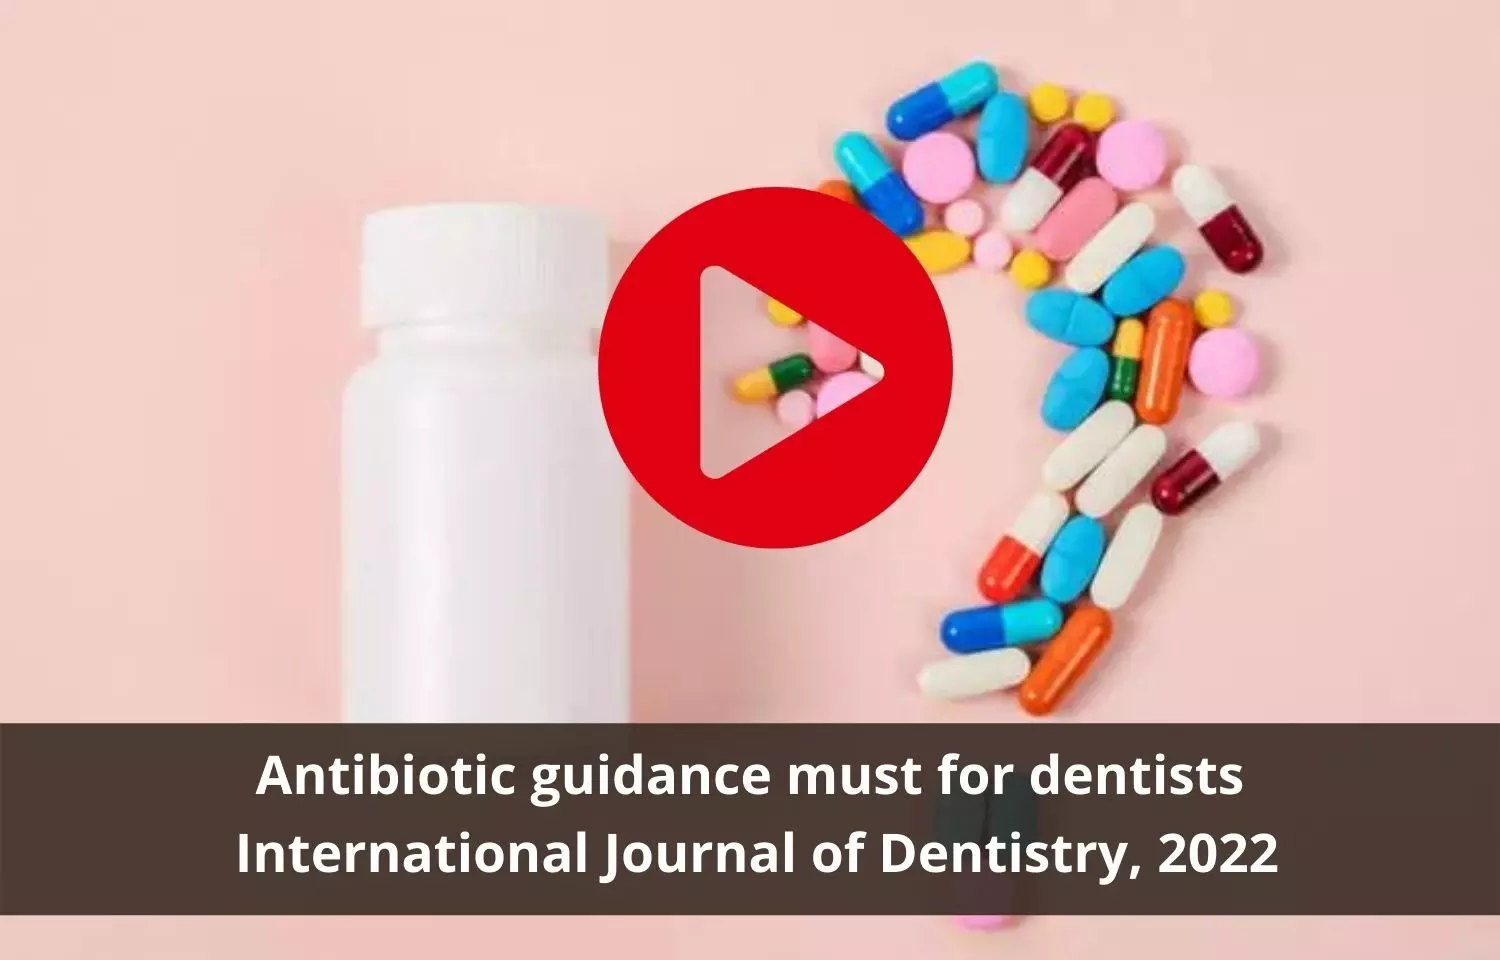 Antibiotic guidelines for dentists to maintain dental health